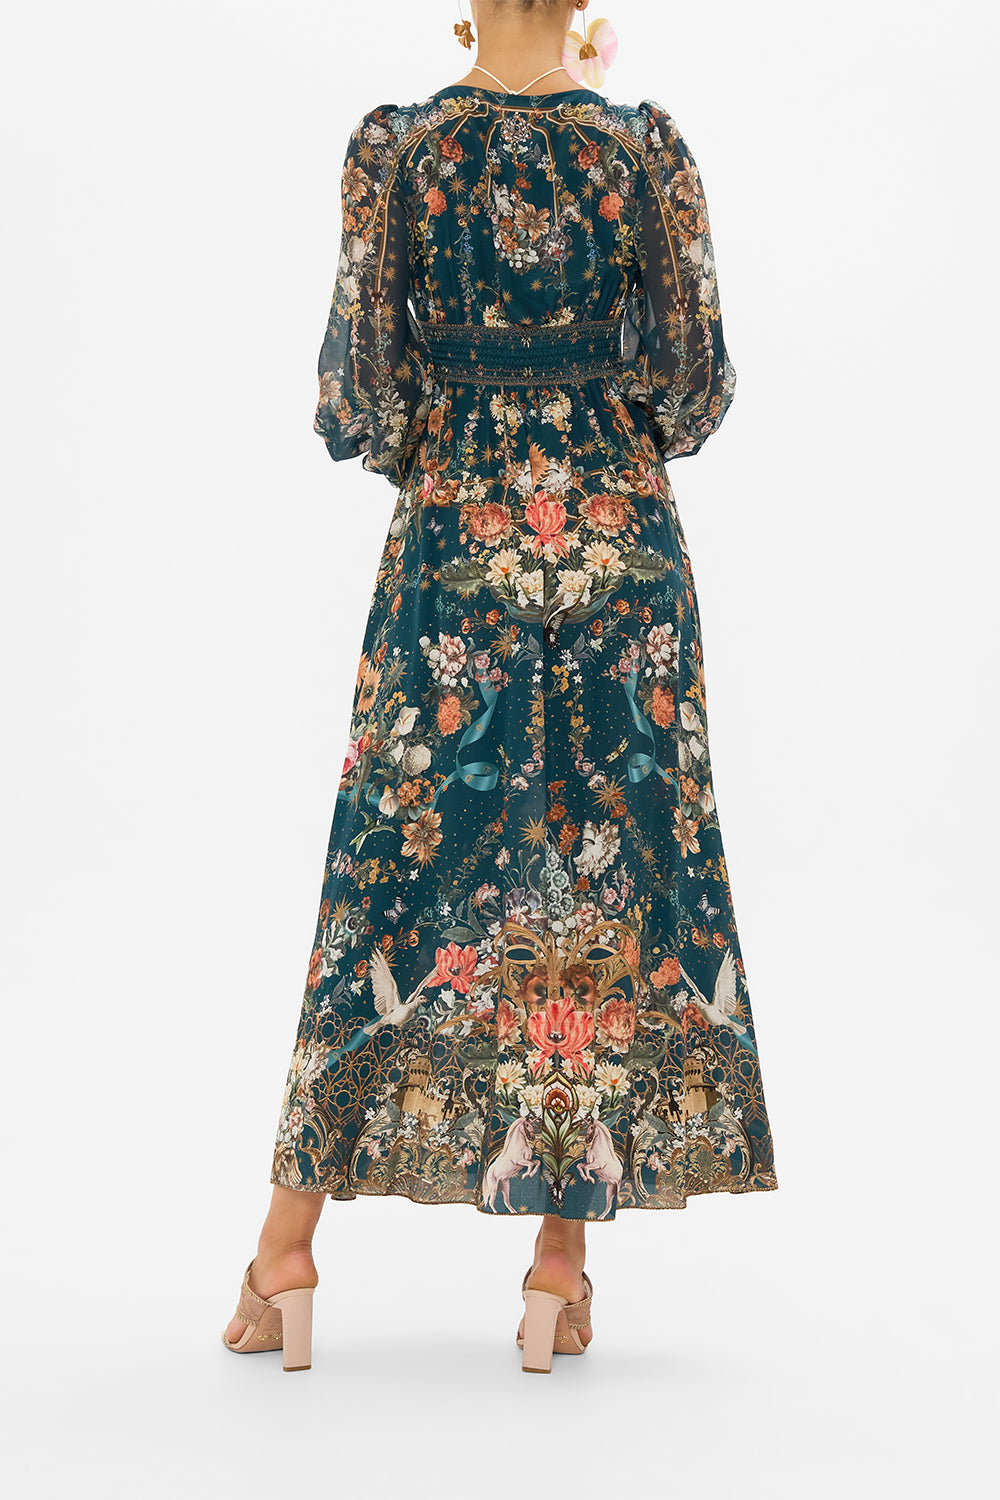 CAMILLA floral  silk dress in She Who Wears The Crown print